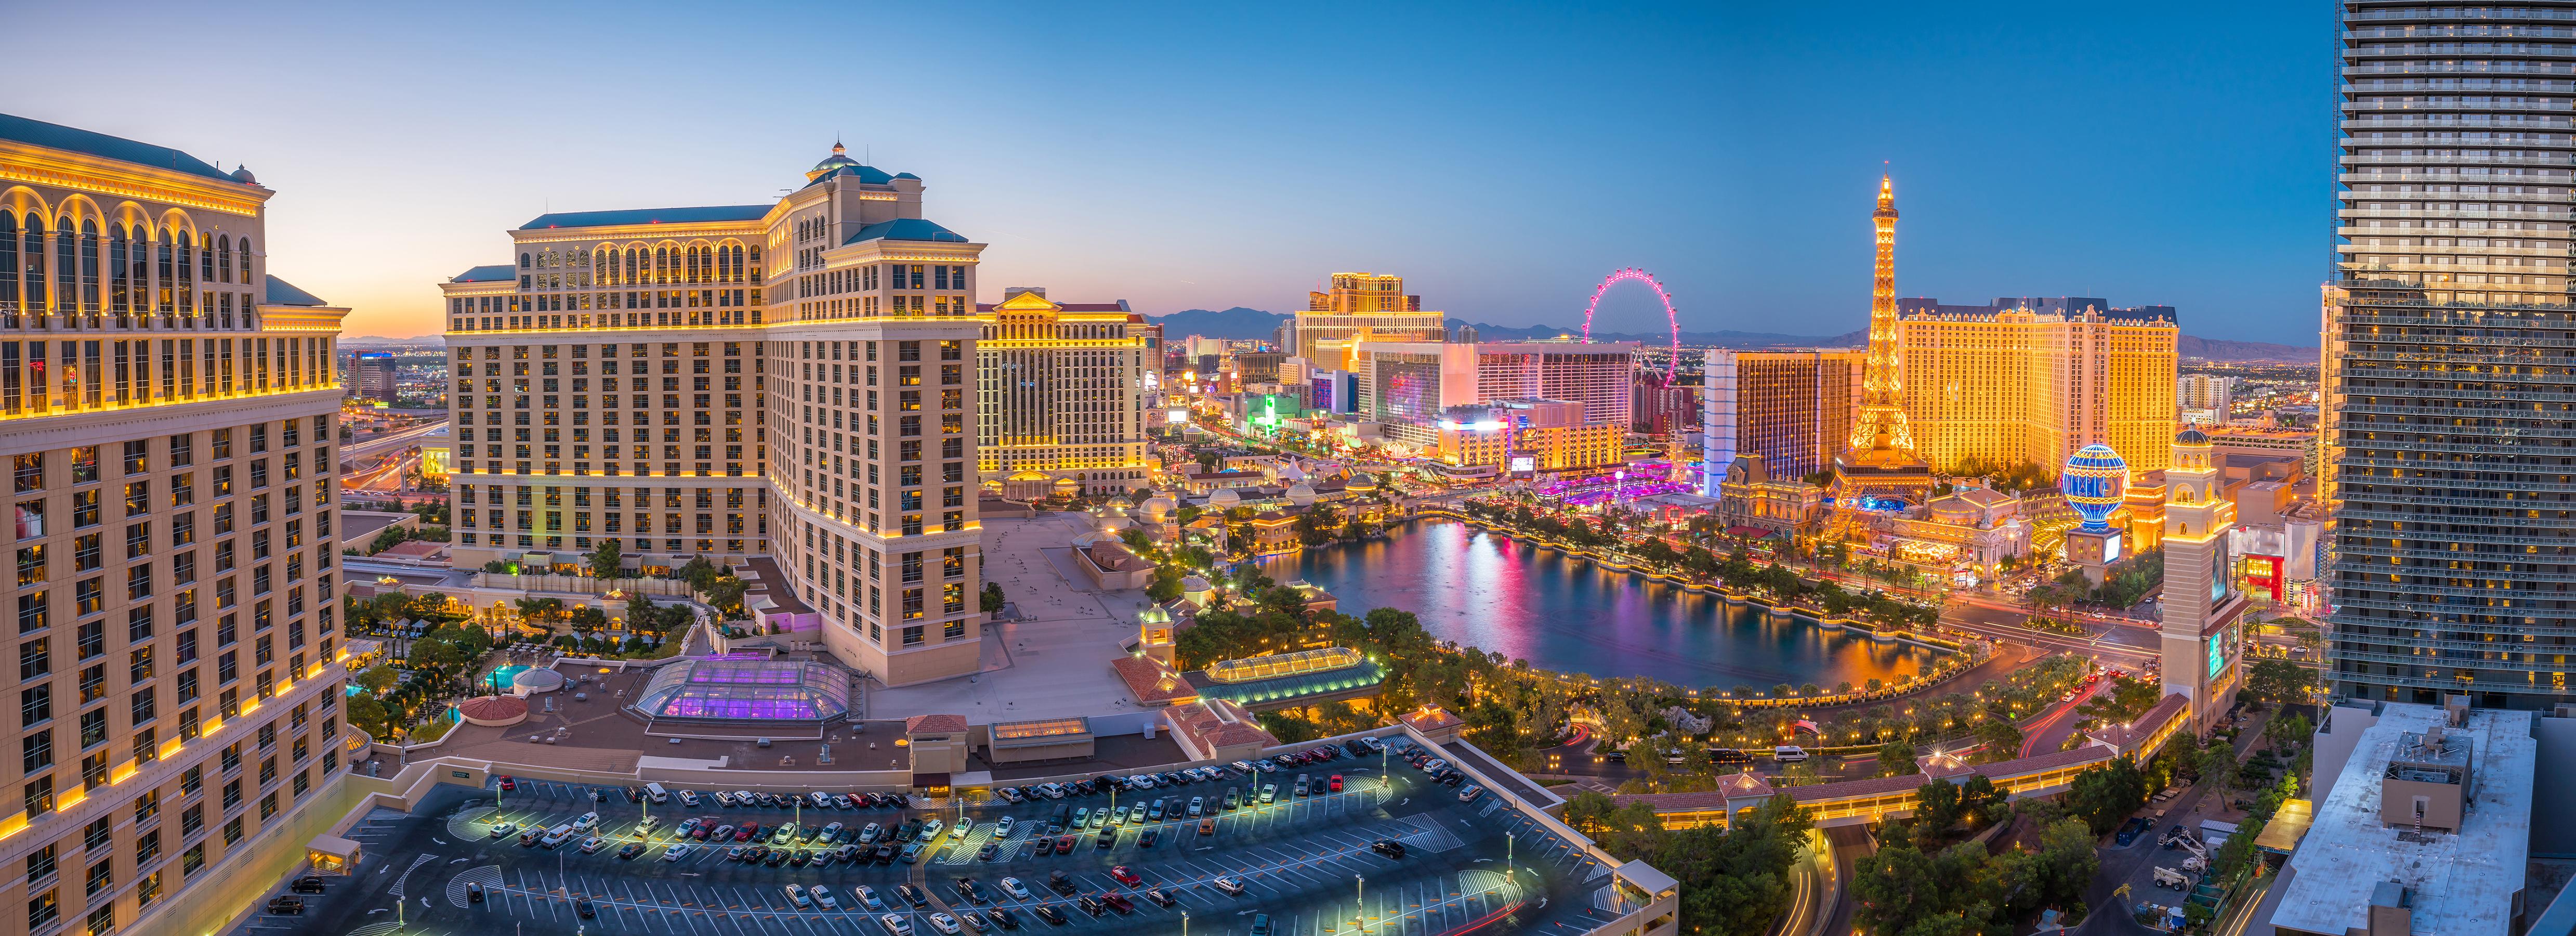 cheapest vegas flights and hotel packages